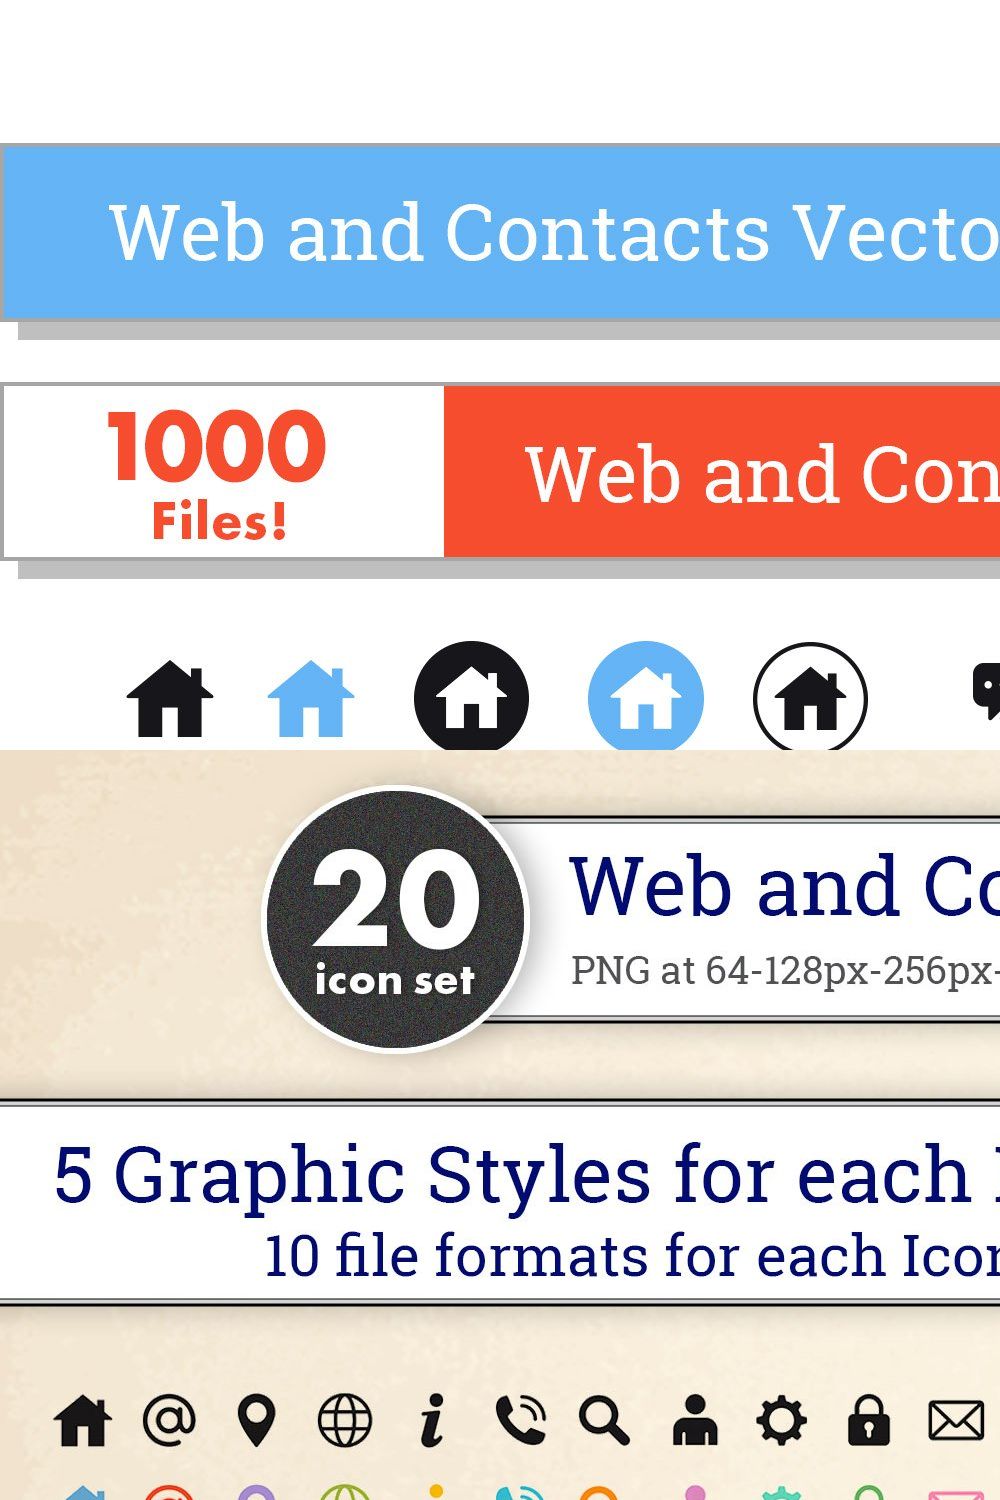 Web and Contacts Vector icons set pinterest preview image.